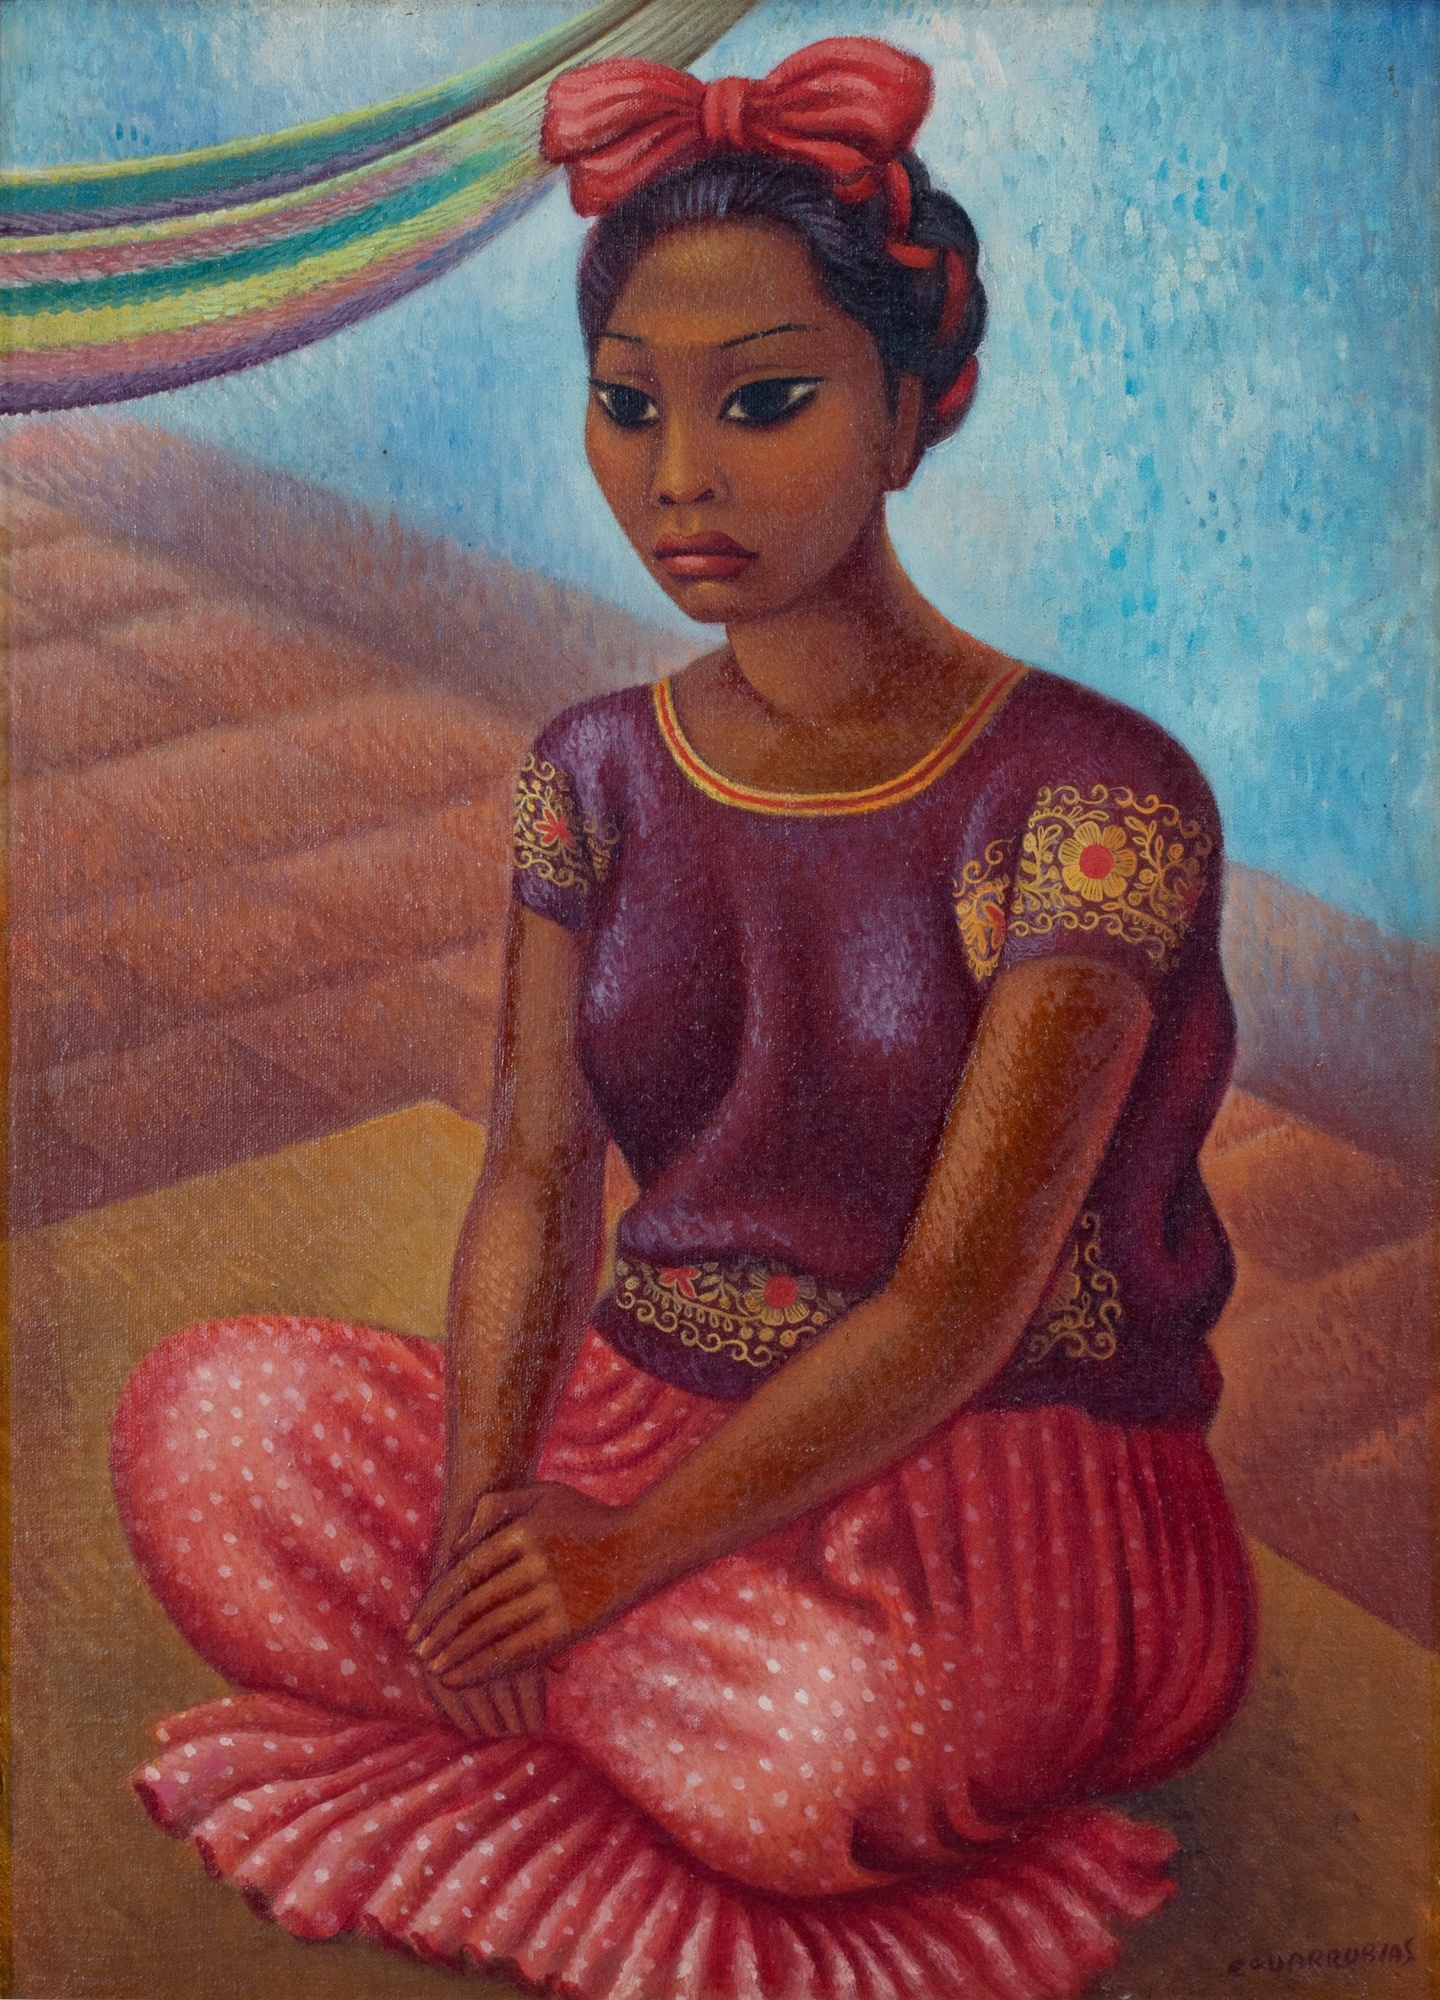 Tehuana by Miguel Covarrubias, Executed circa 1942